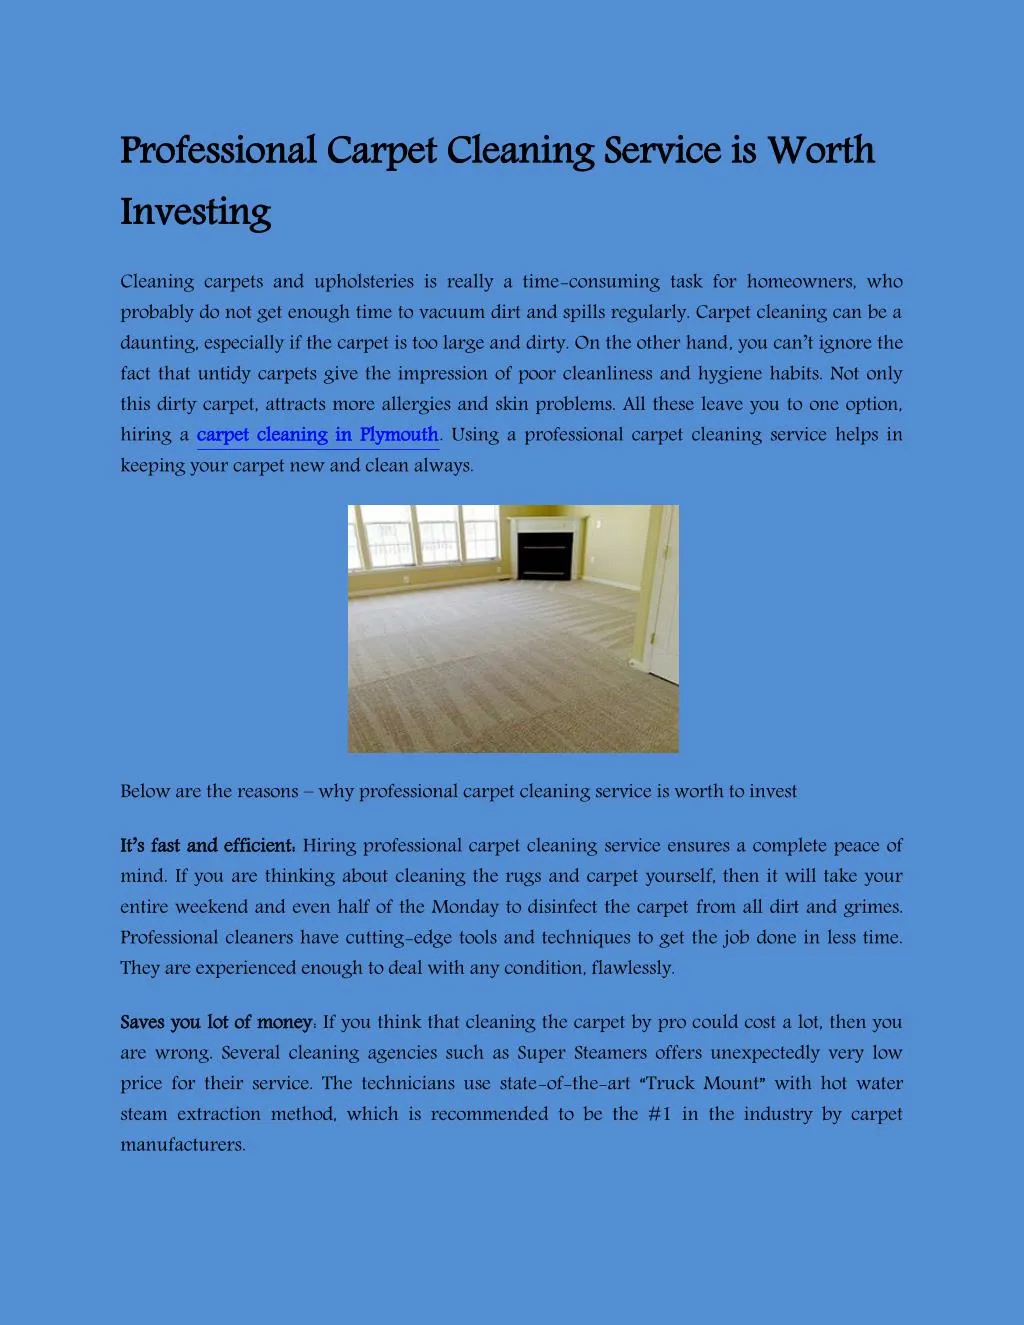 professional carpet cleaning service is investing